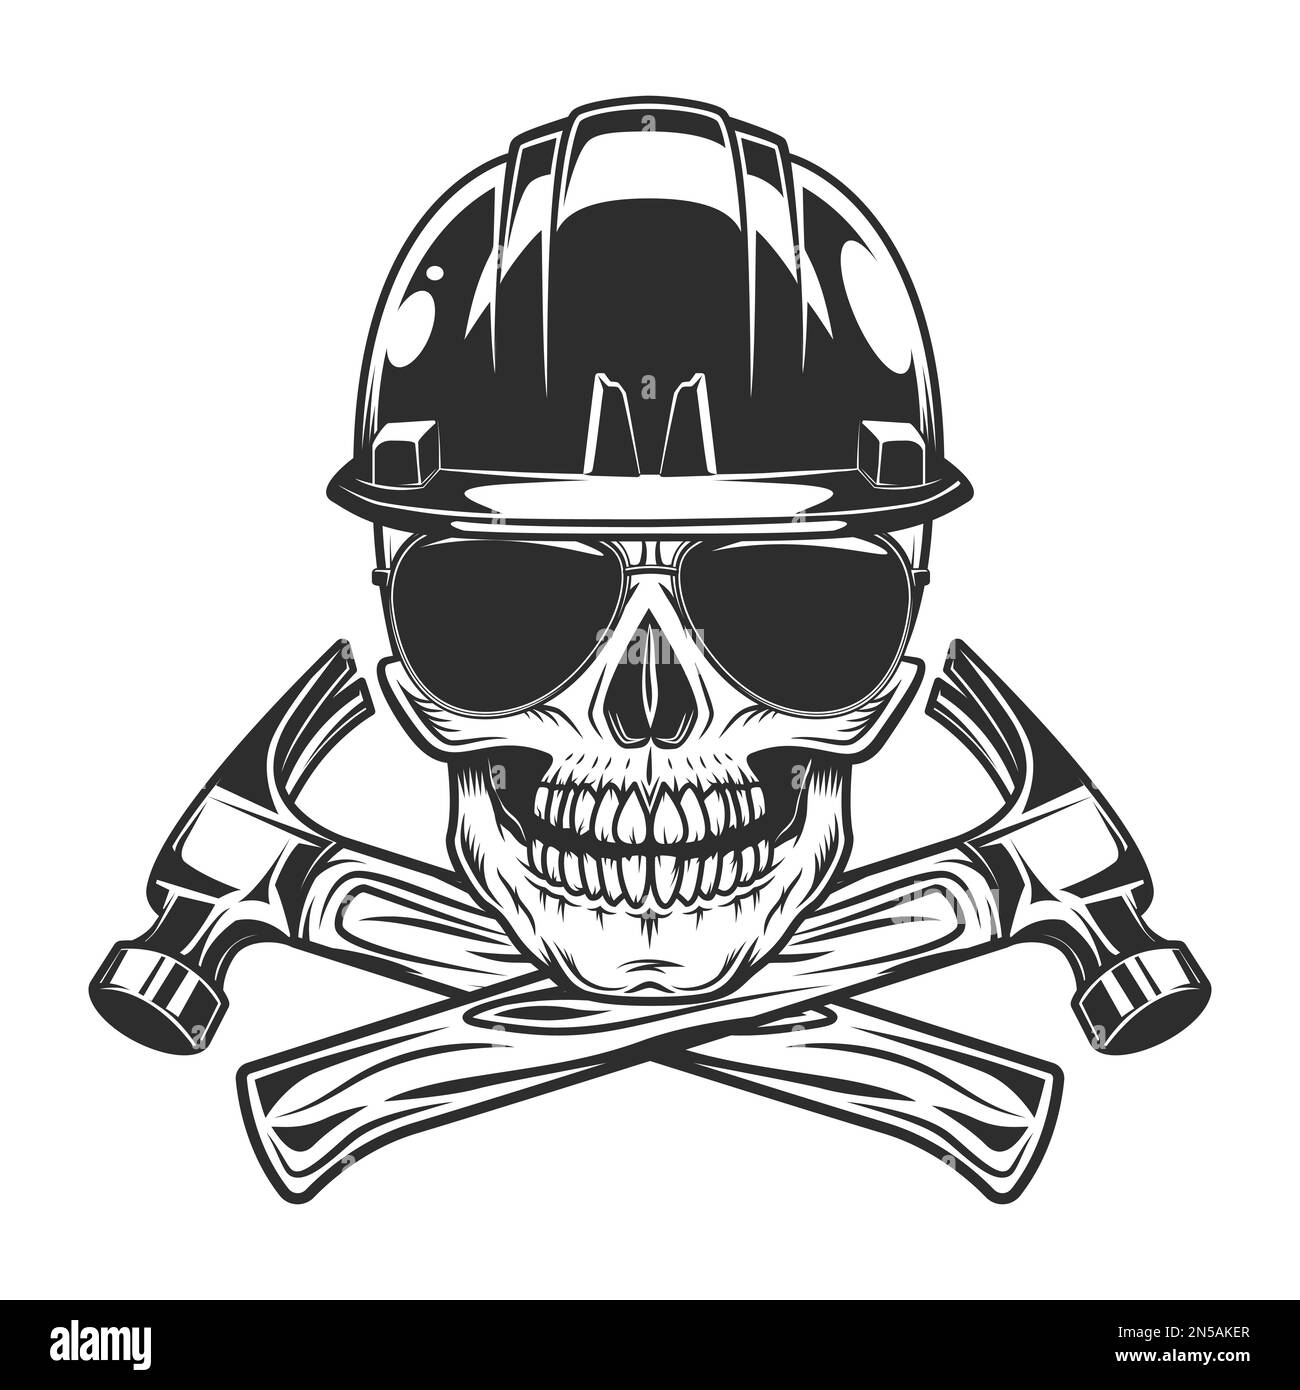 Skull in hardhat buider helmet with construction hammer tools and ...